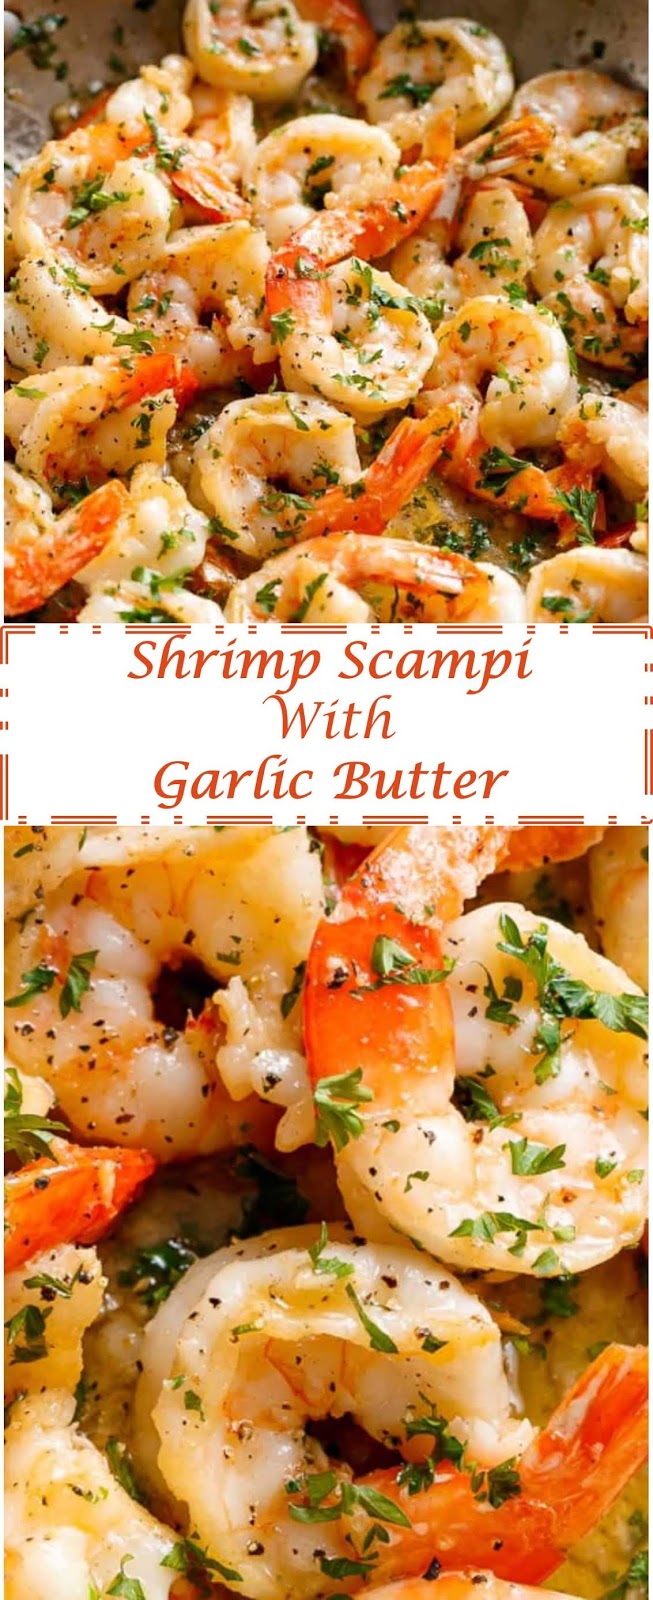 240 Reviews: My BEST #Recipes >> #Shrimp Scampi with Garlic Butter - ~~~.